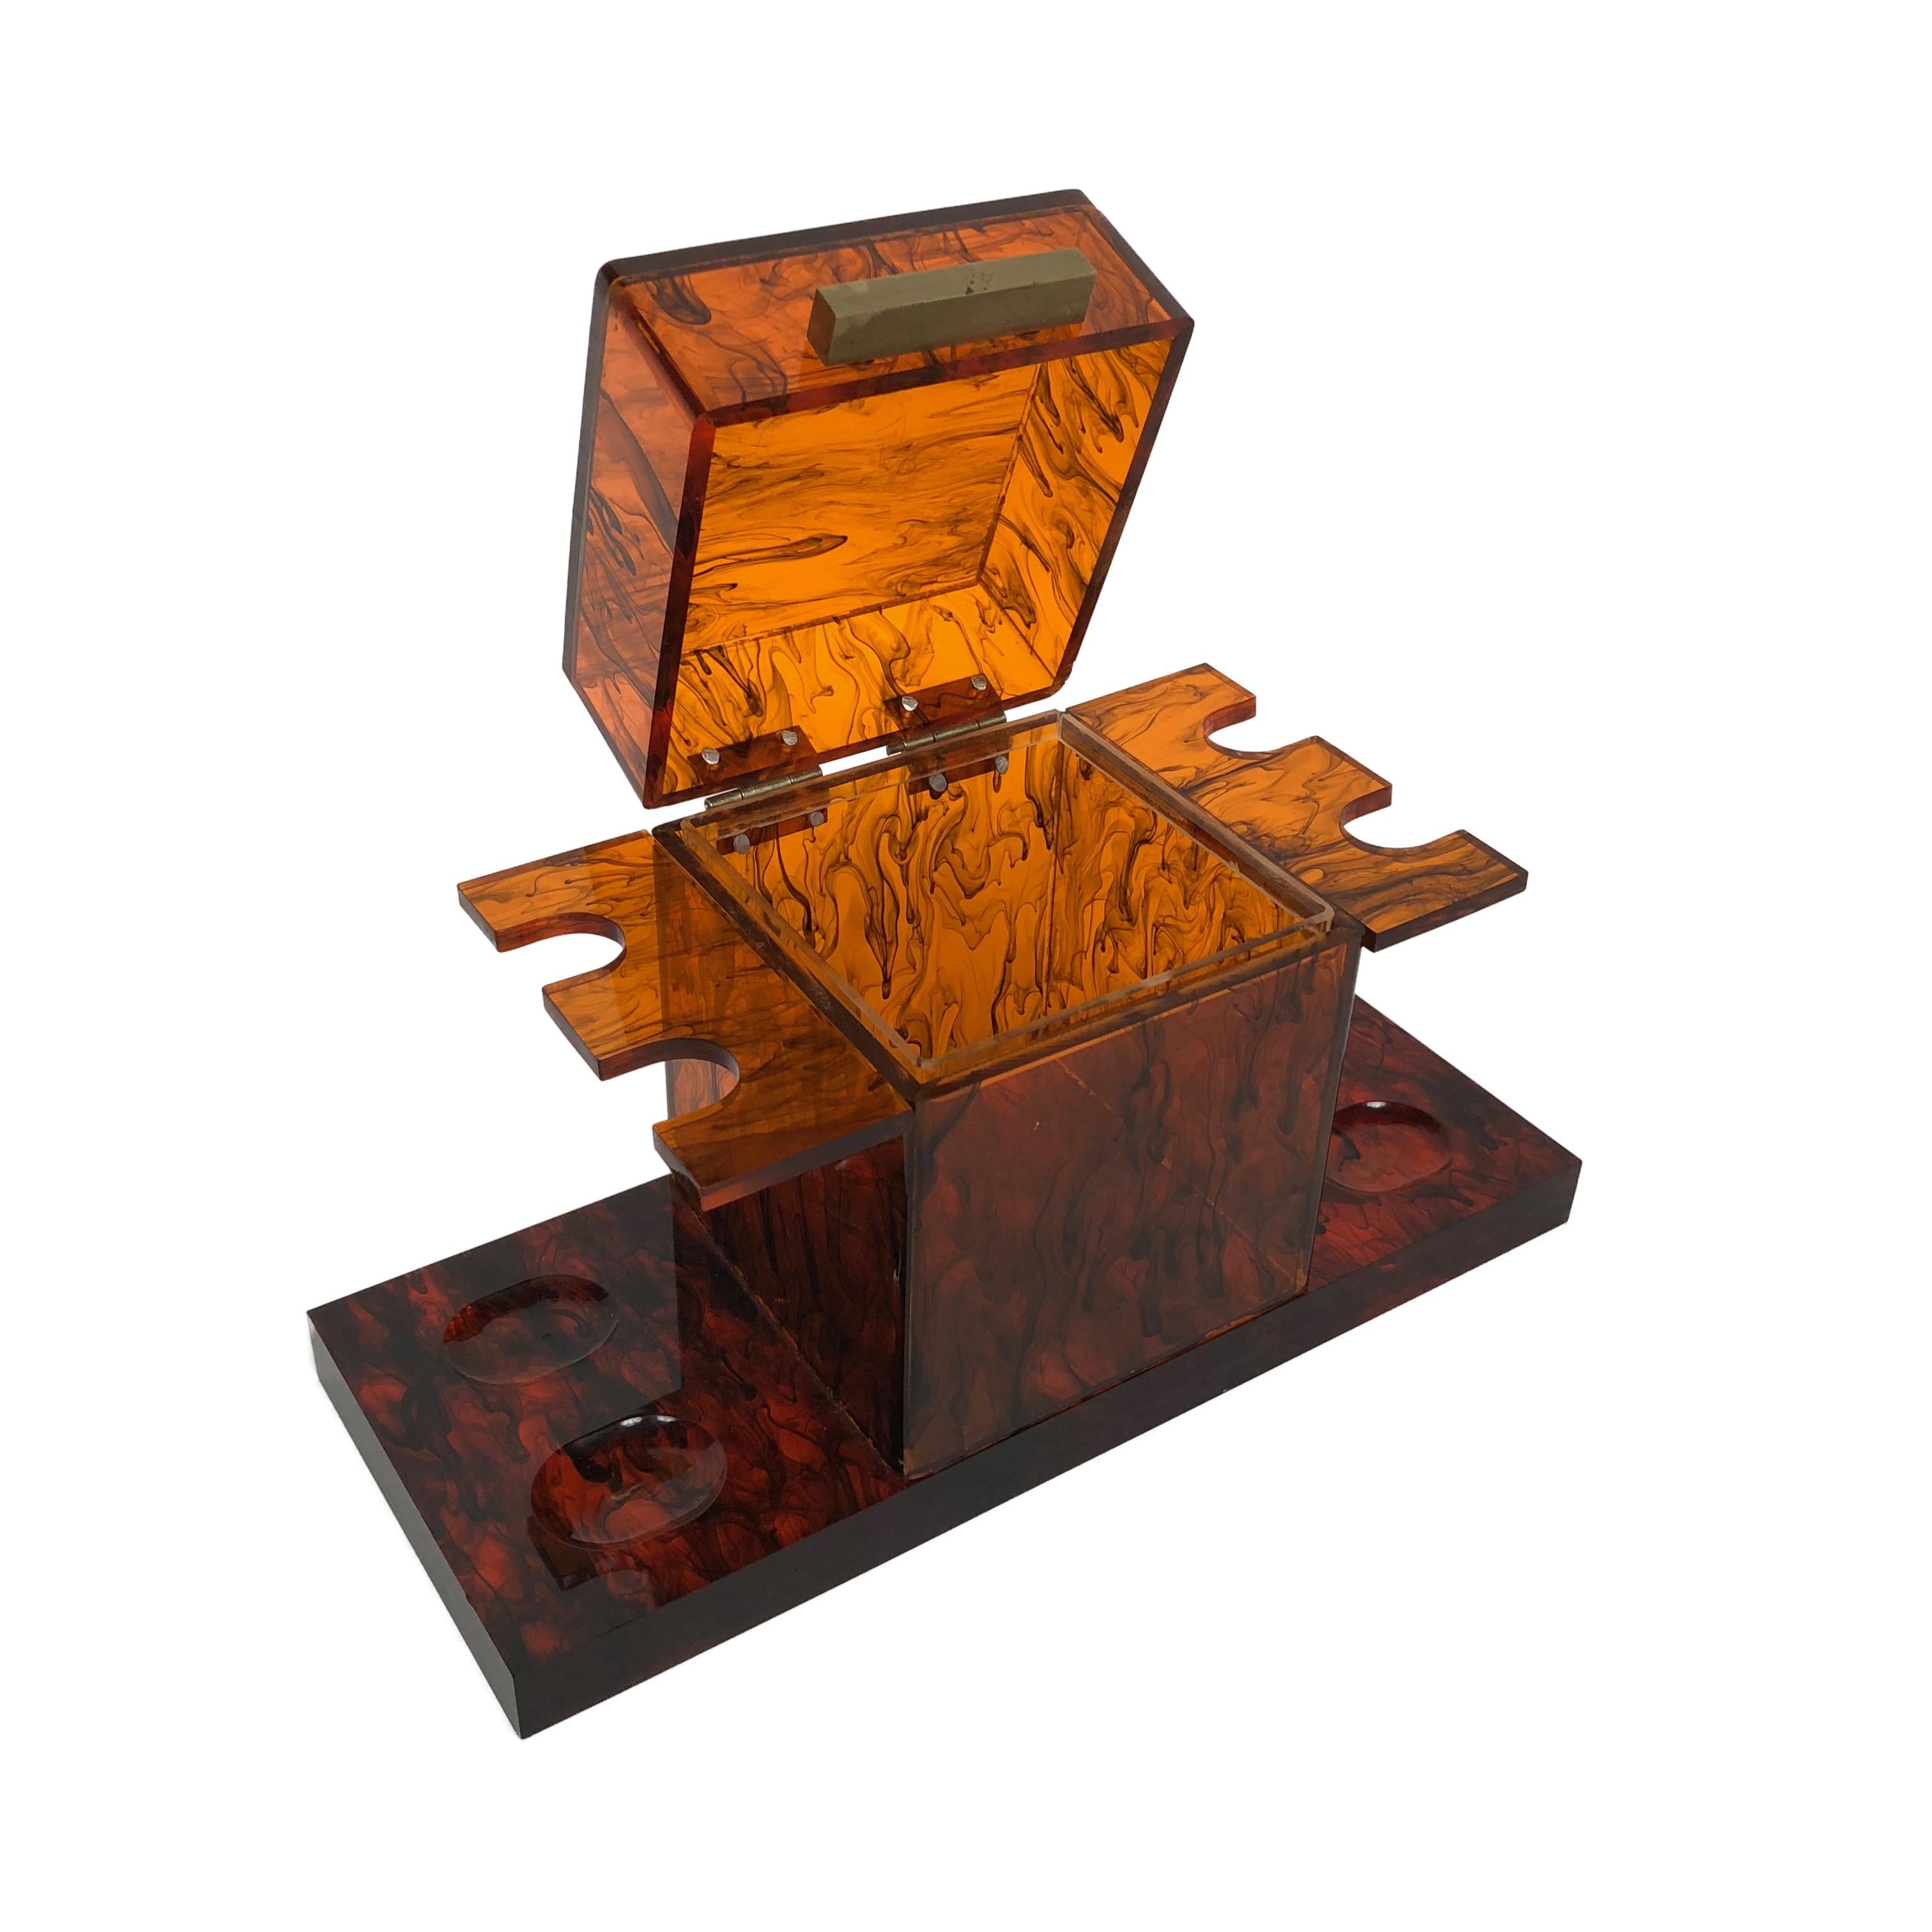 Late 20th Century Mid-Century Modern Tortoiseshell Pipe Holder and Tabac Box in Lucite